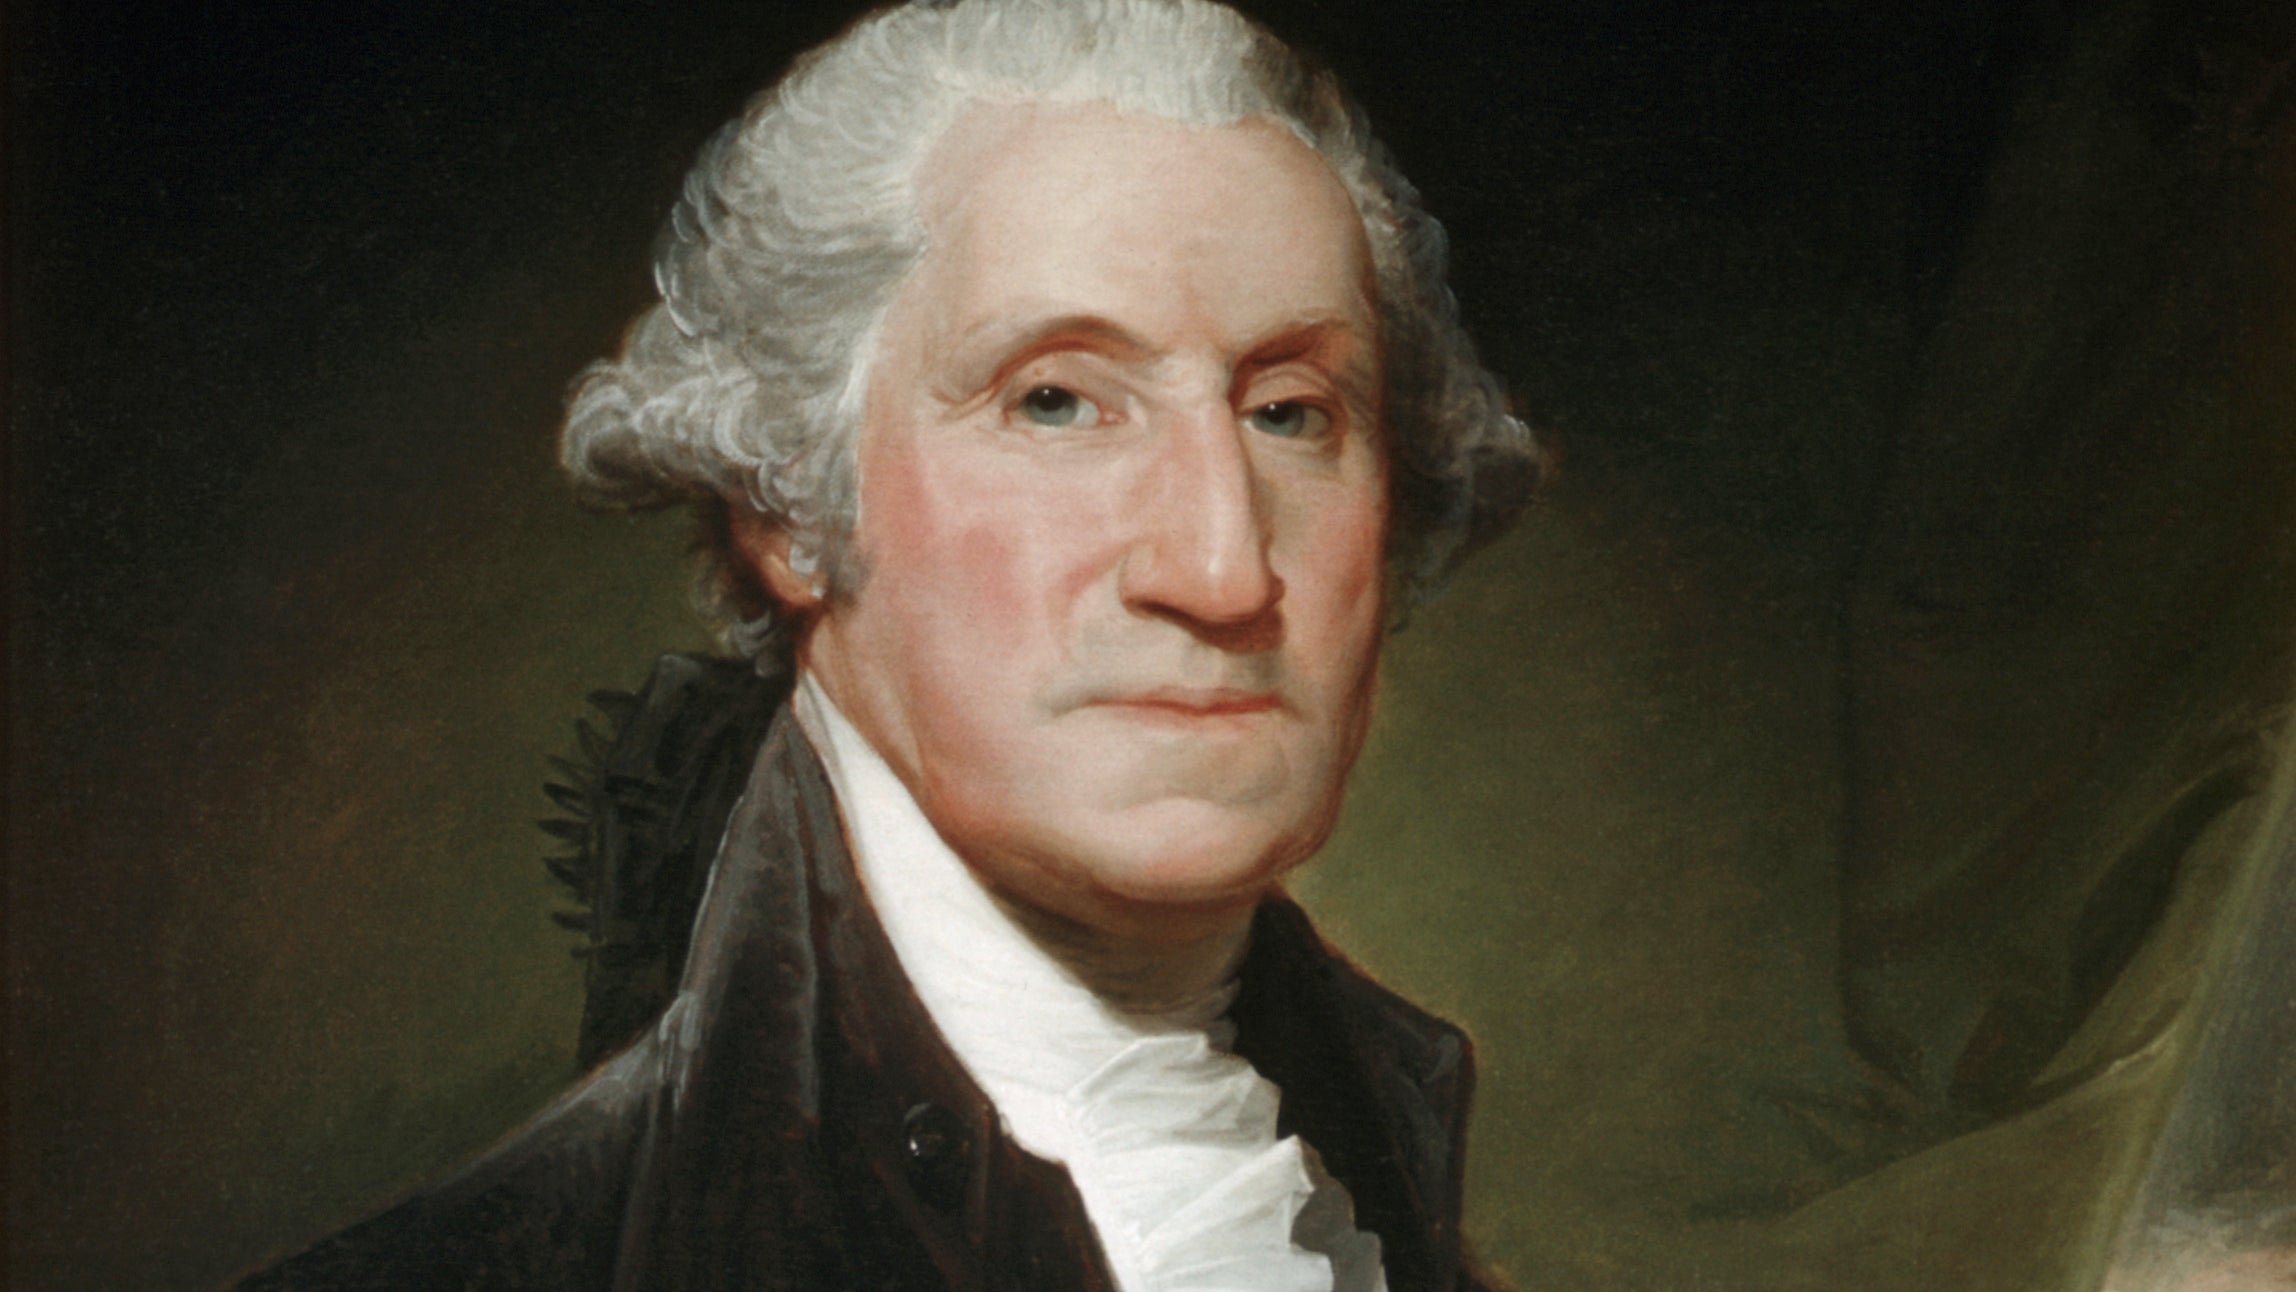 celebrating george washington's legacy across the US with free events and dual holidays